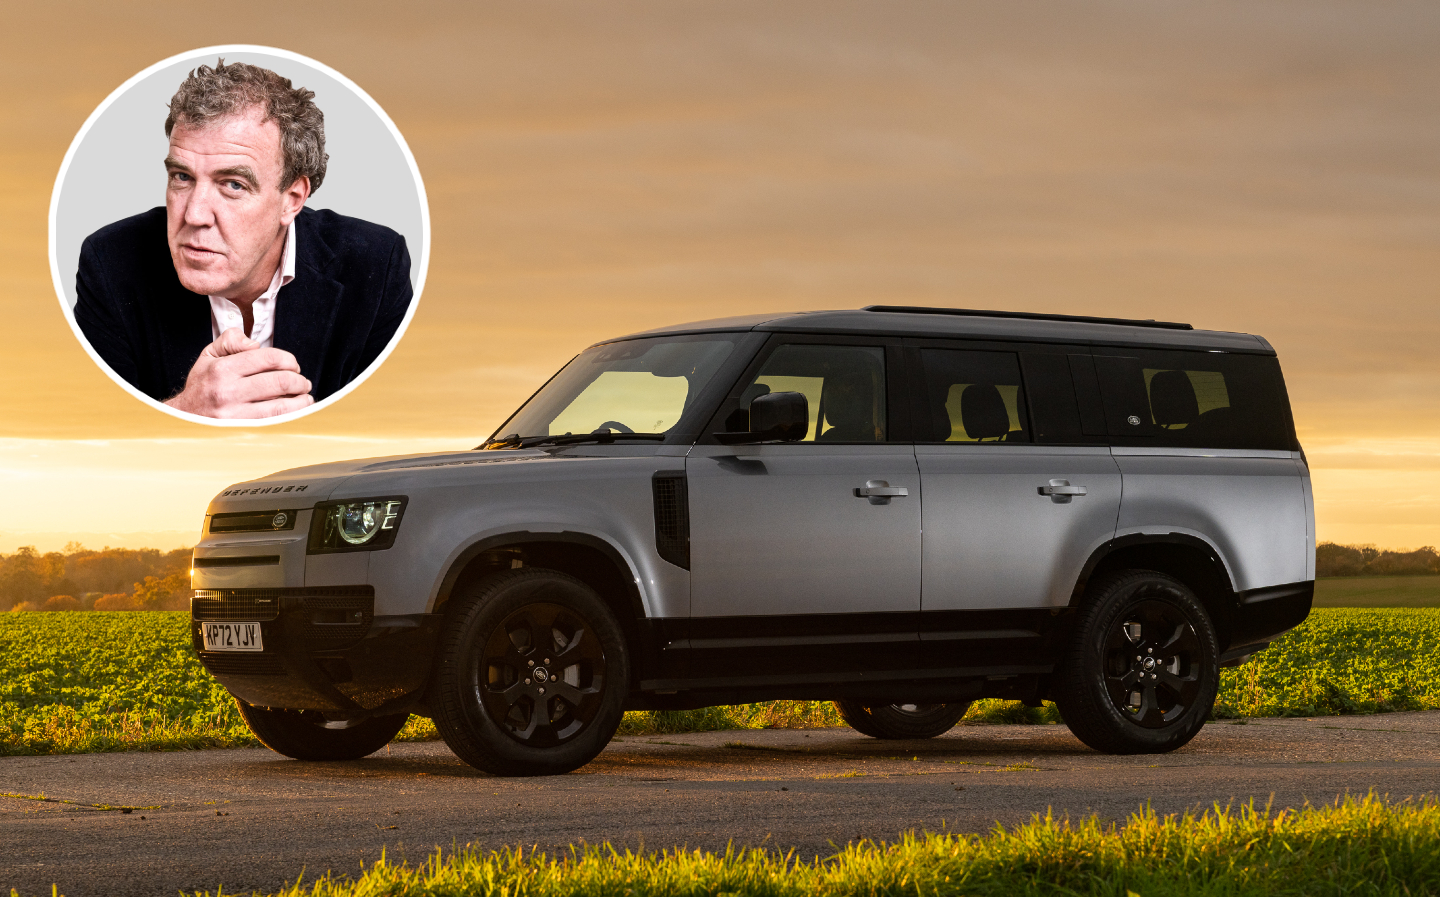 Jeremy Clarkson has driven the Land Rover Defender 130, and he's